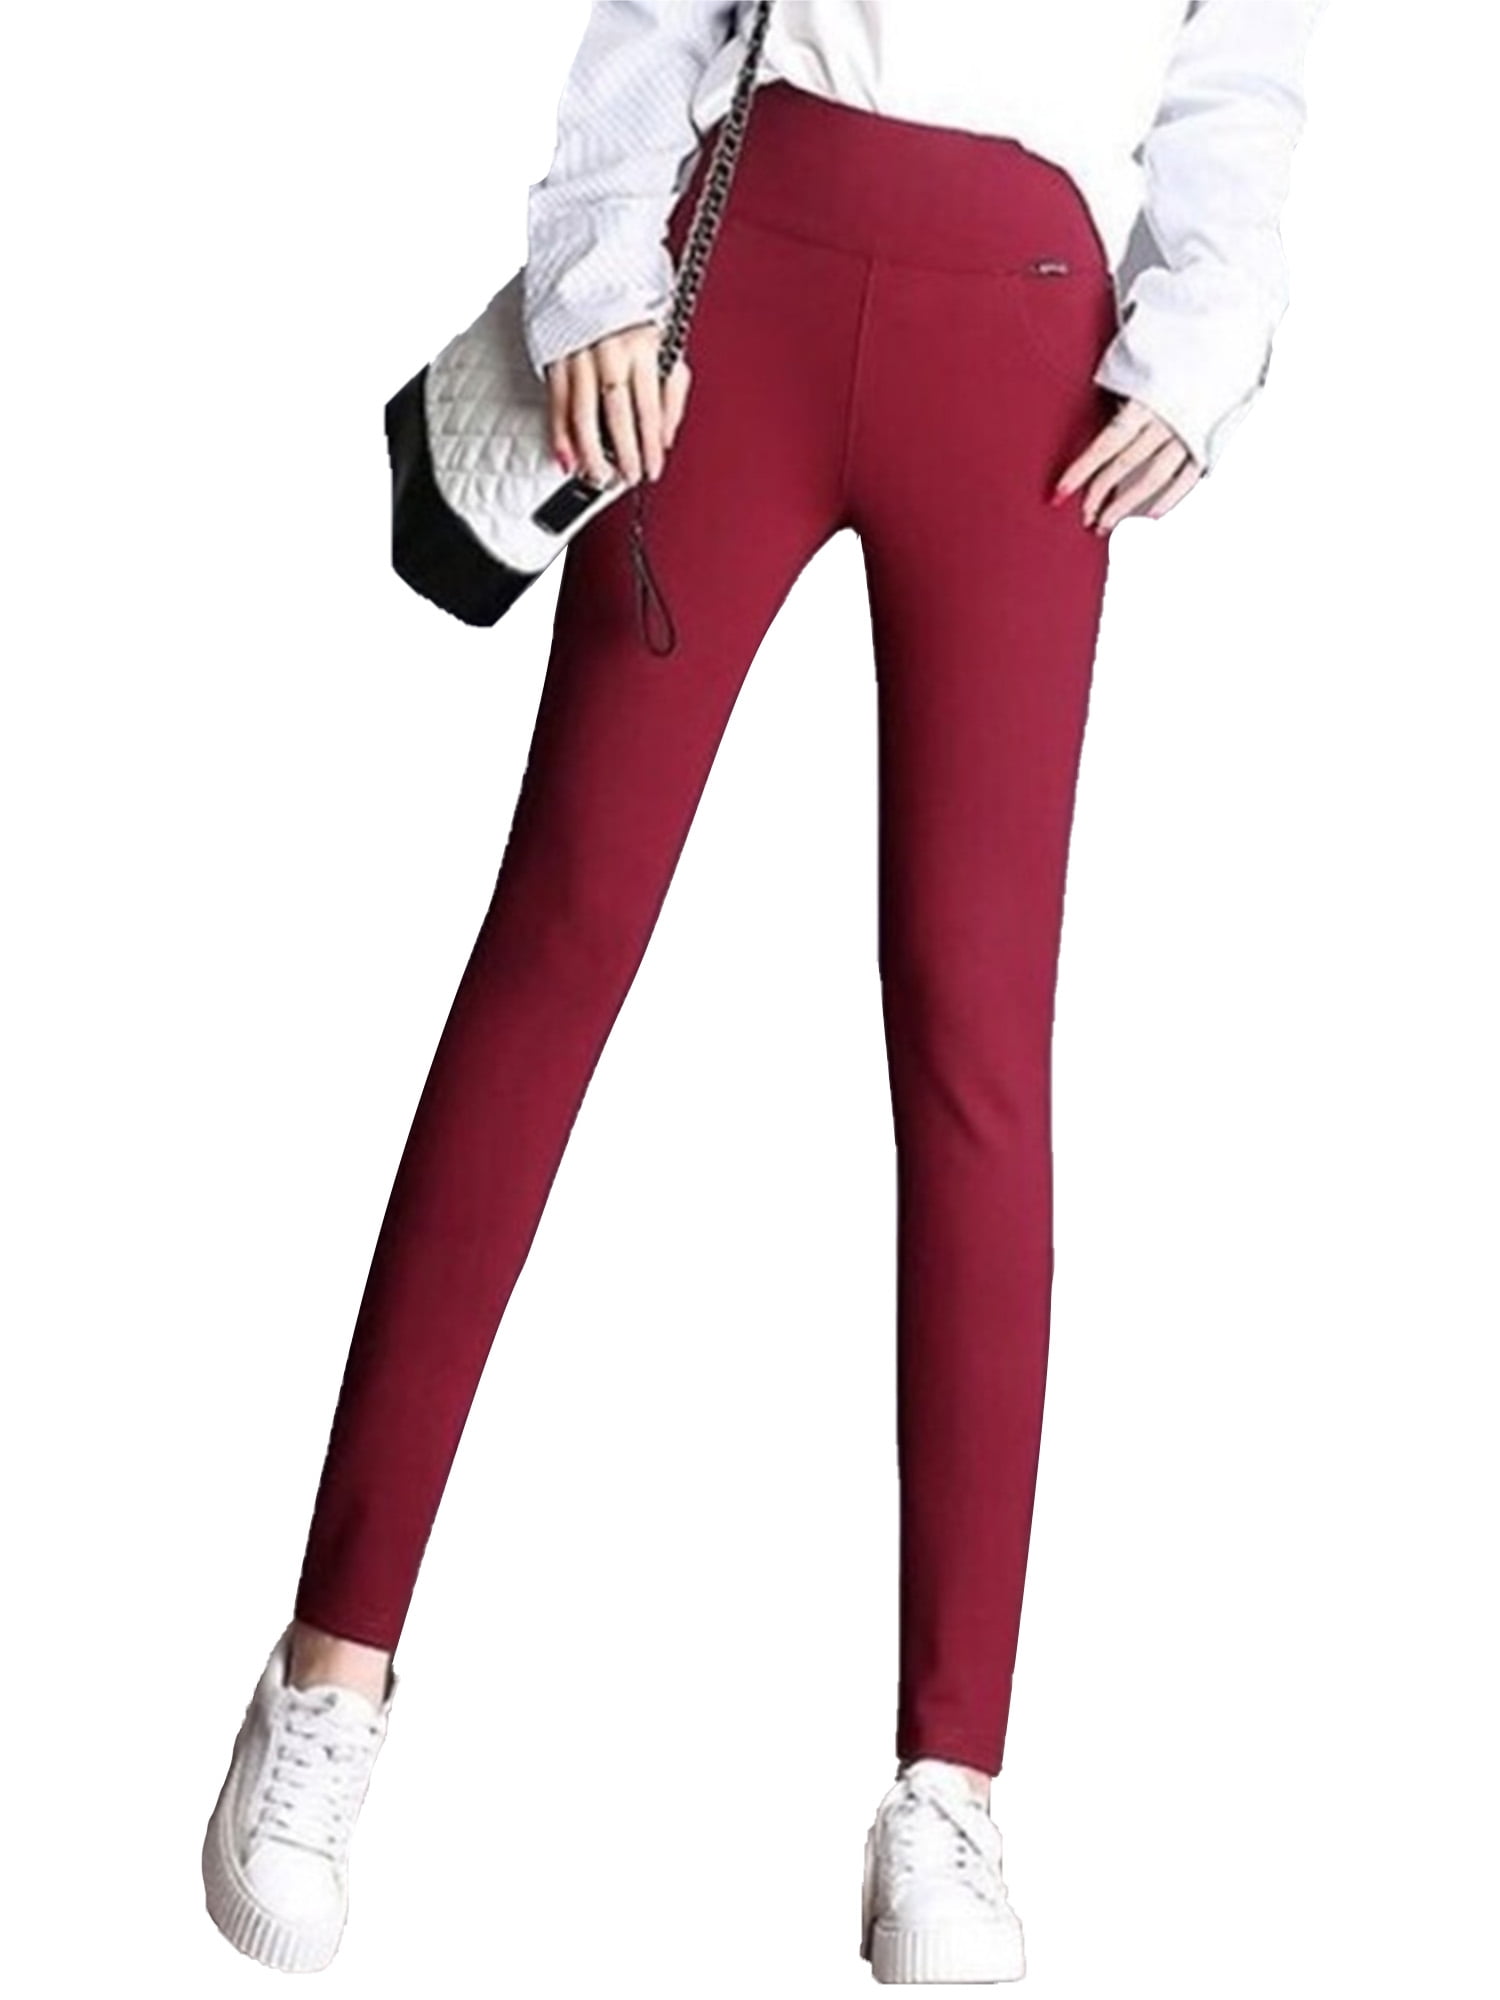 Women's High Waisted Slim Skinny Leggings Stretch Jegging Pencil Pants Trousers